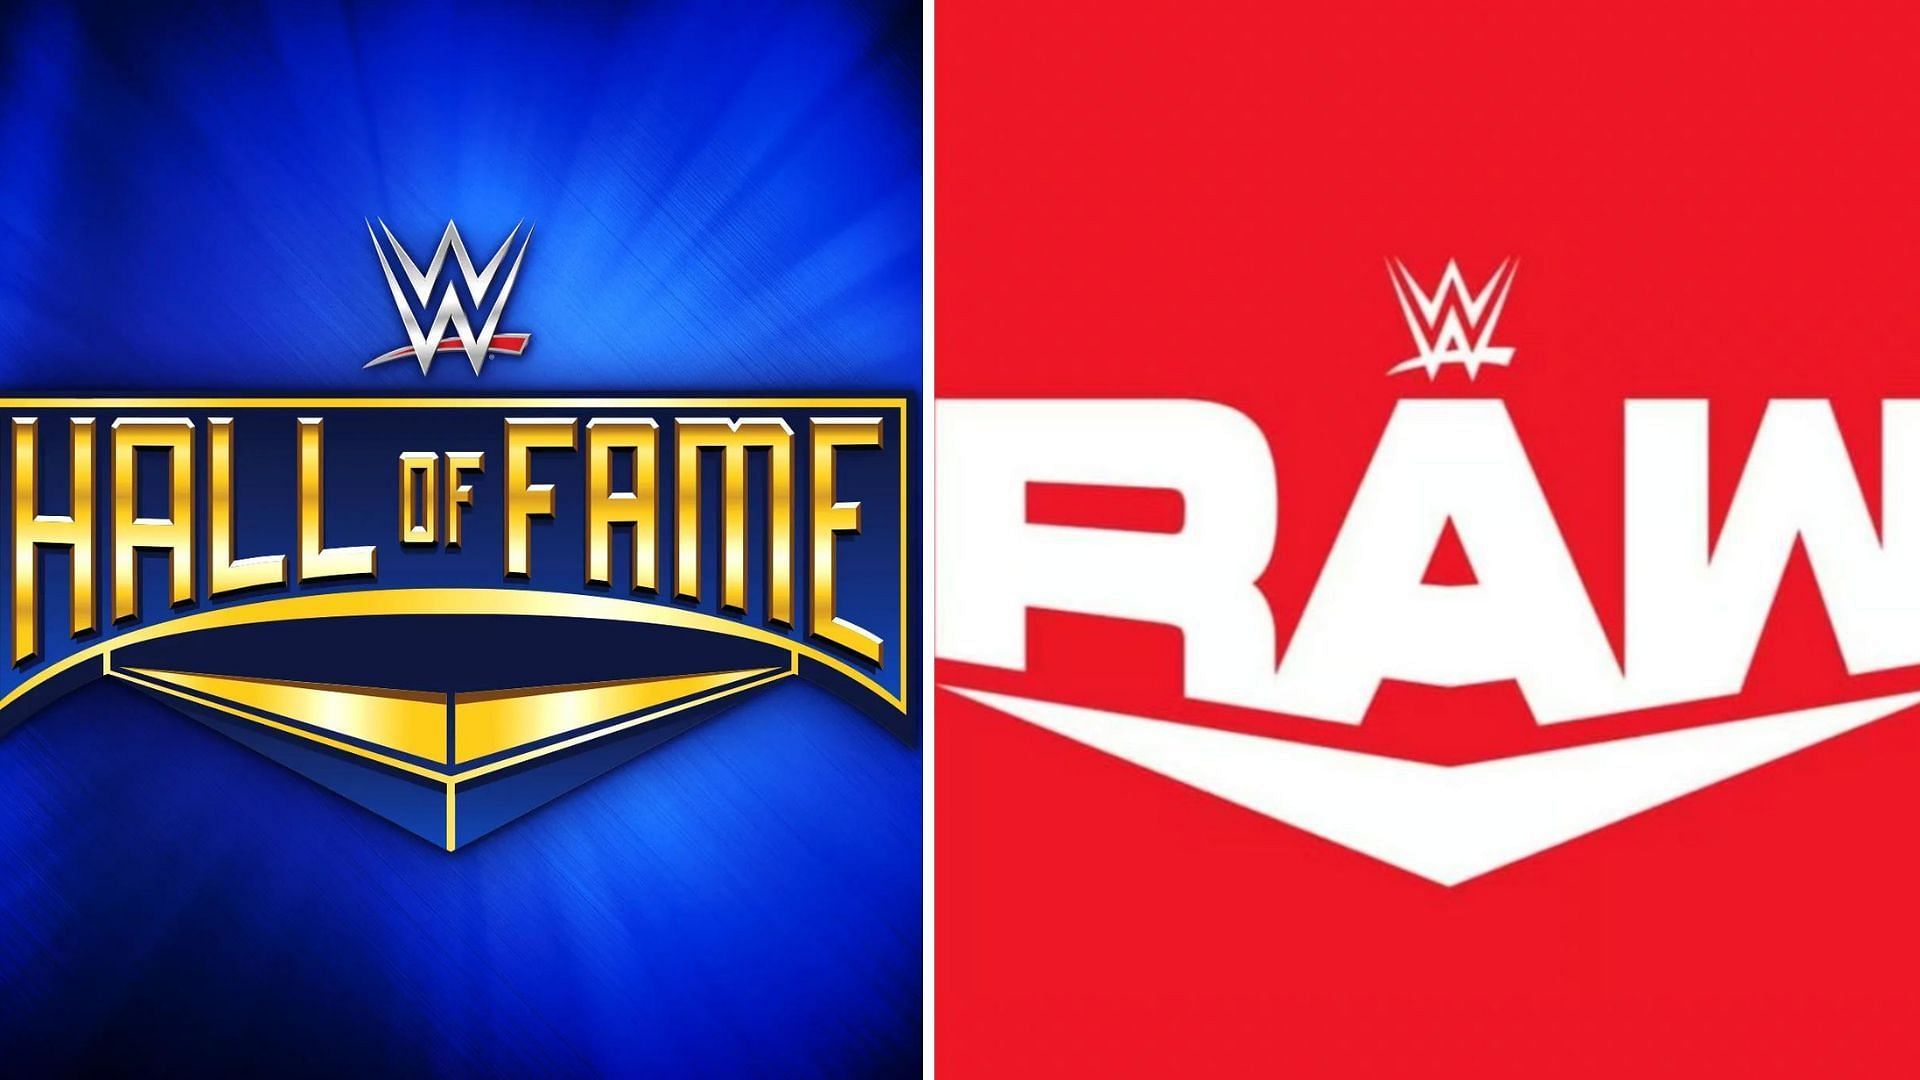 A WWE Hall of Famer reportedly is scheduled for RAW.